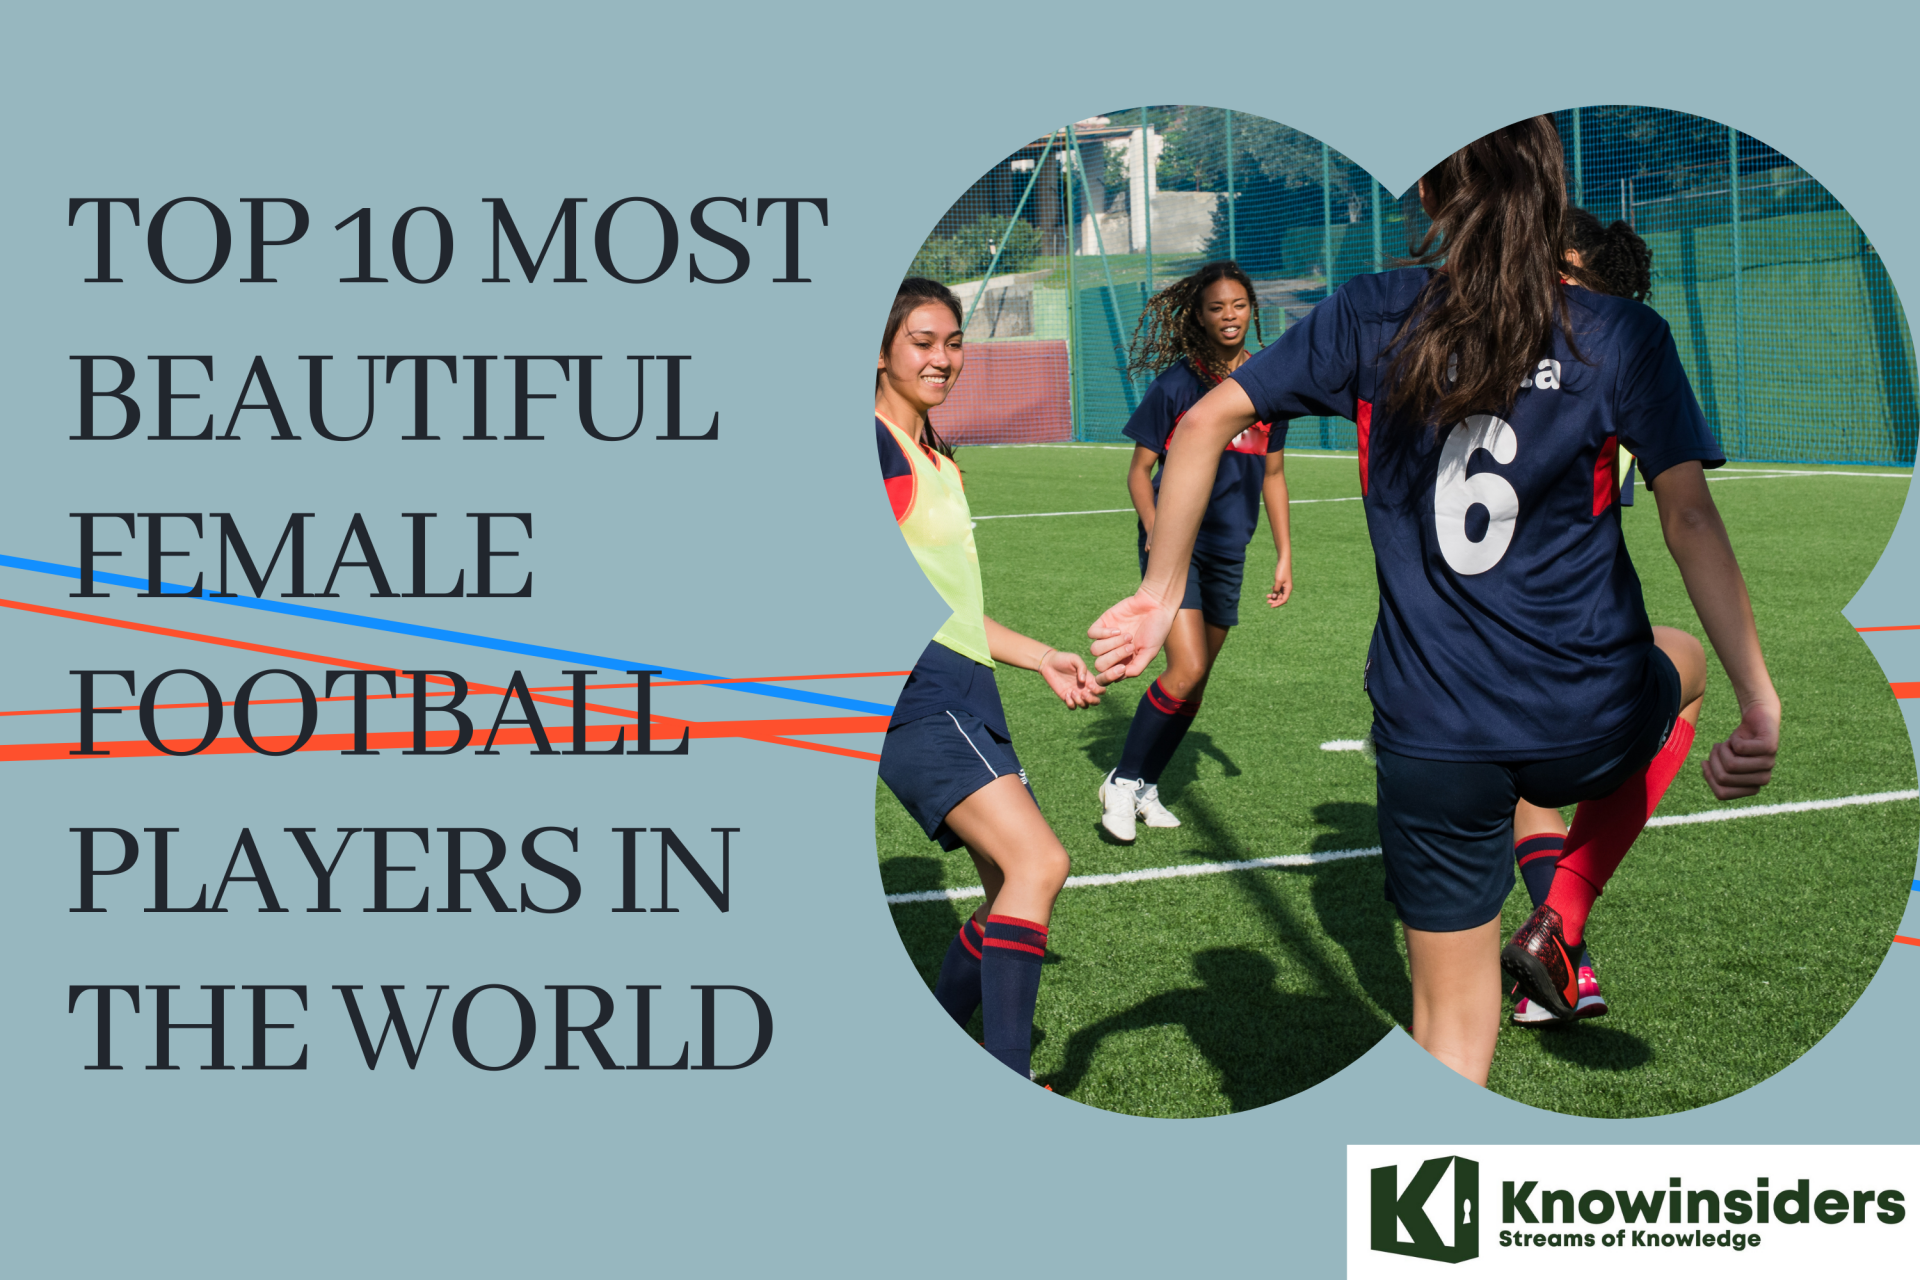 Top 10 Most Beautiful Female Football Players in The World Right Now